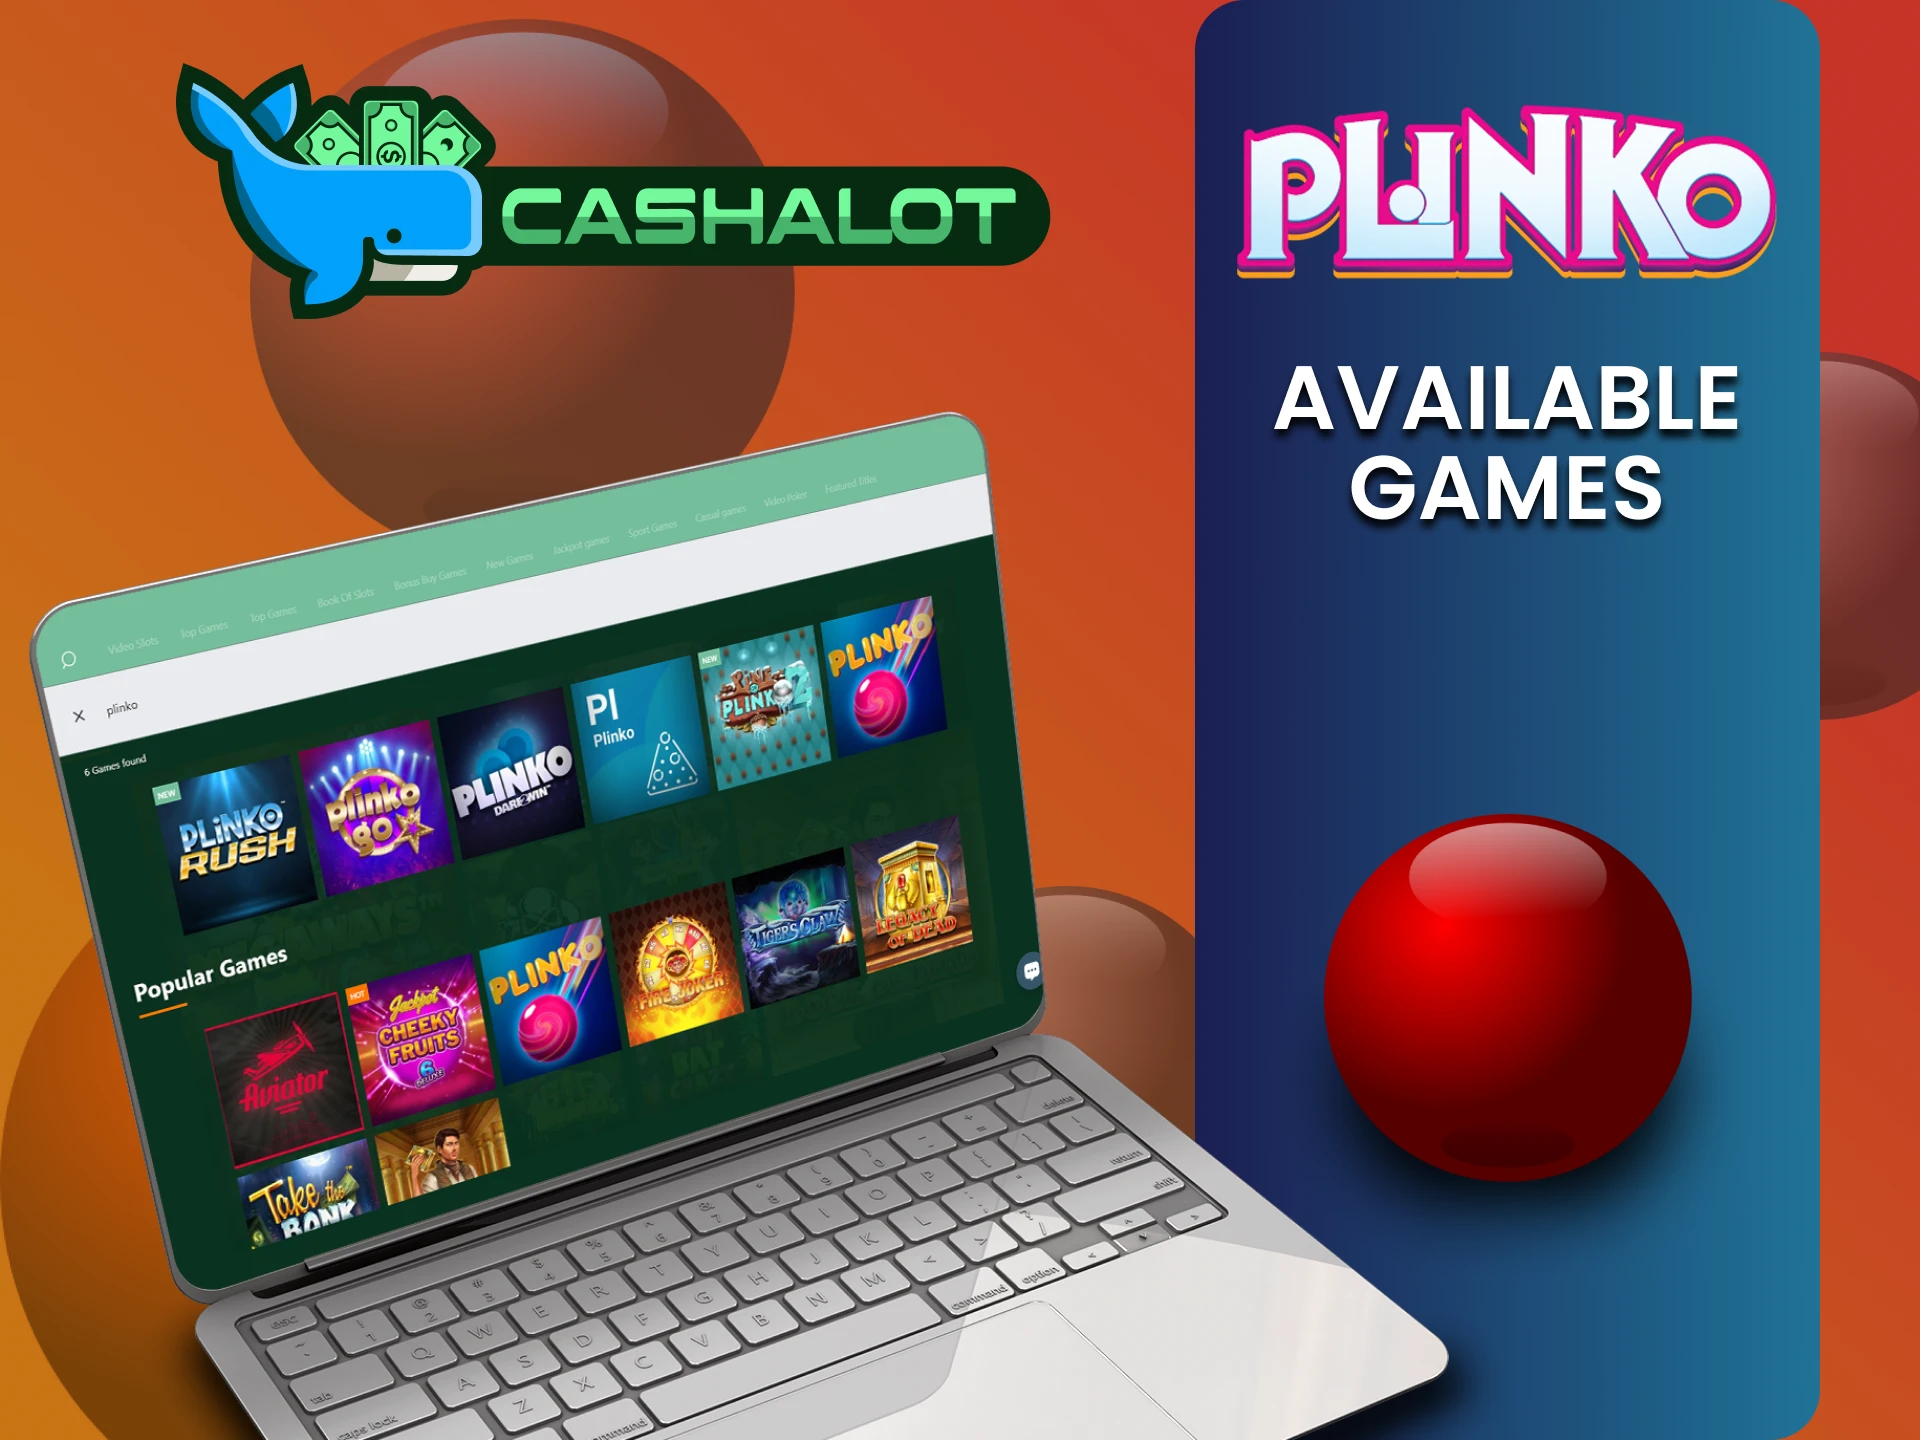 Check out the list of Plinko games on the Cashalot website.